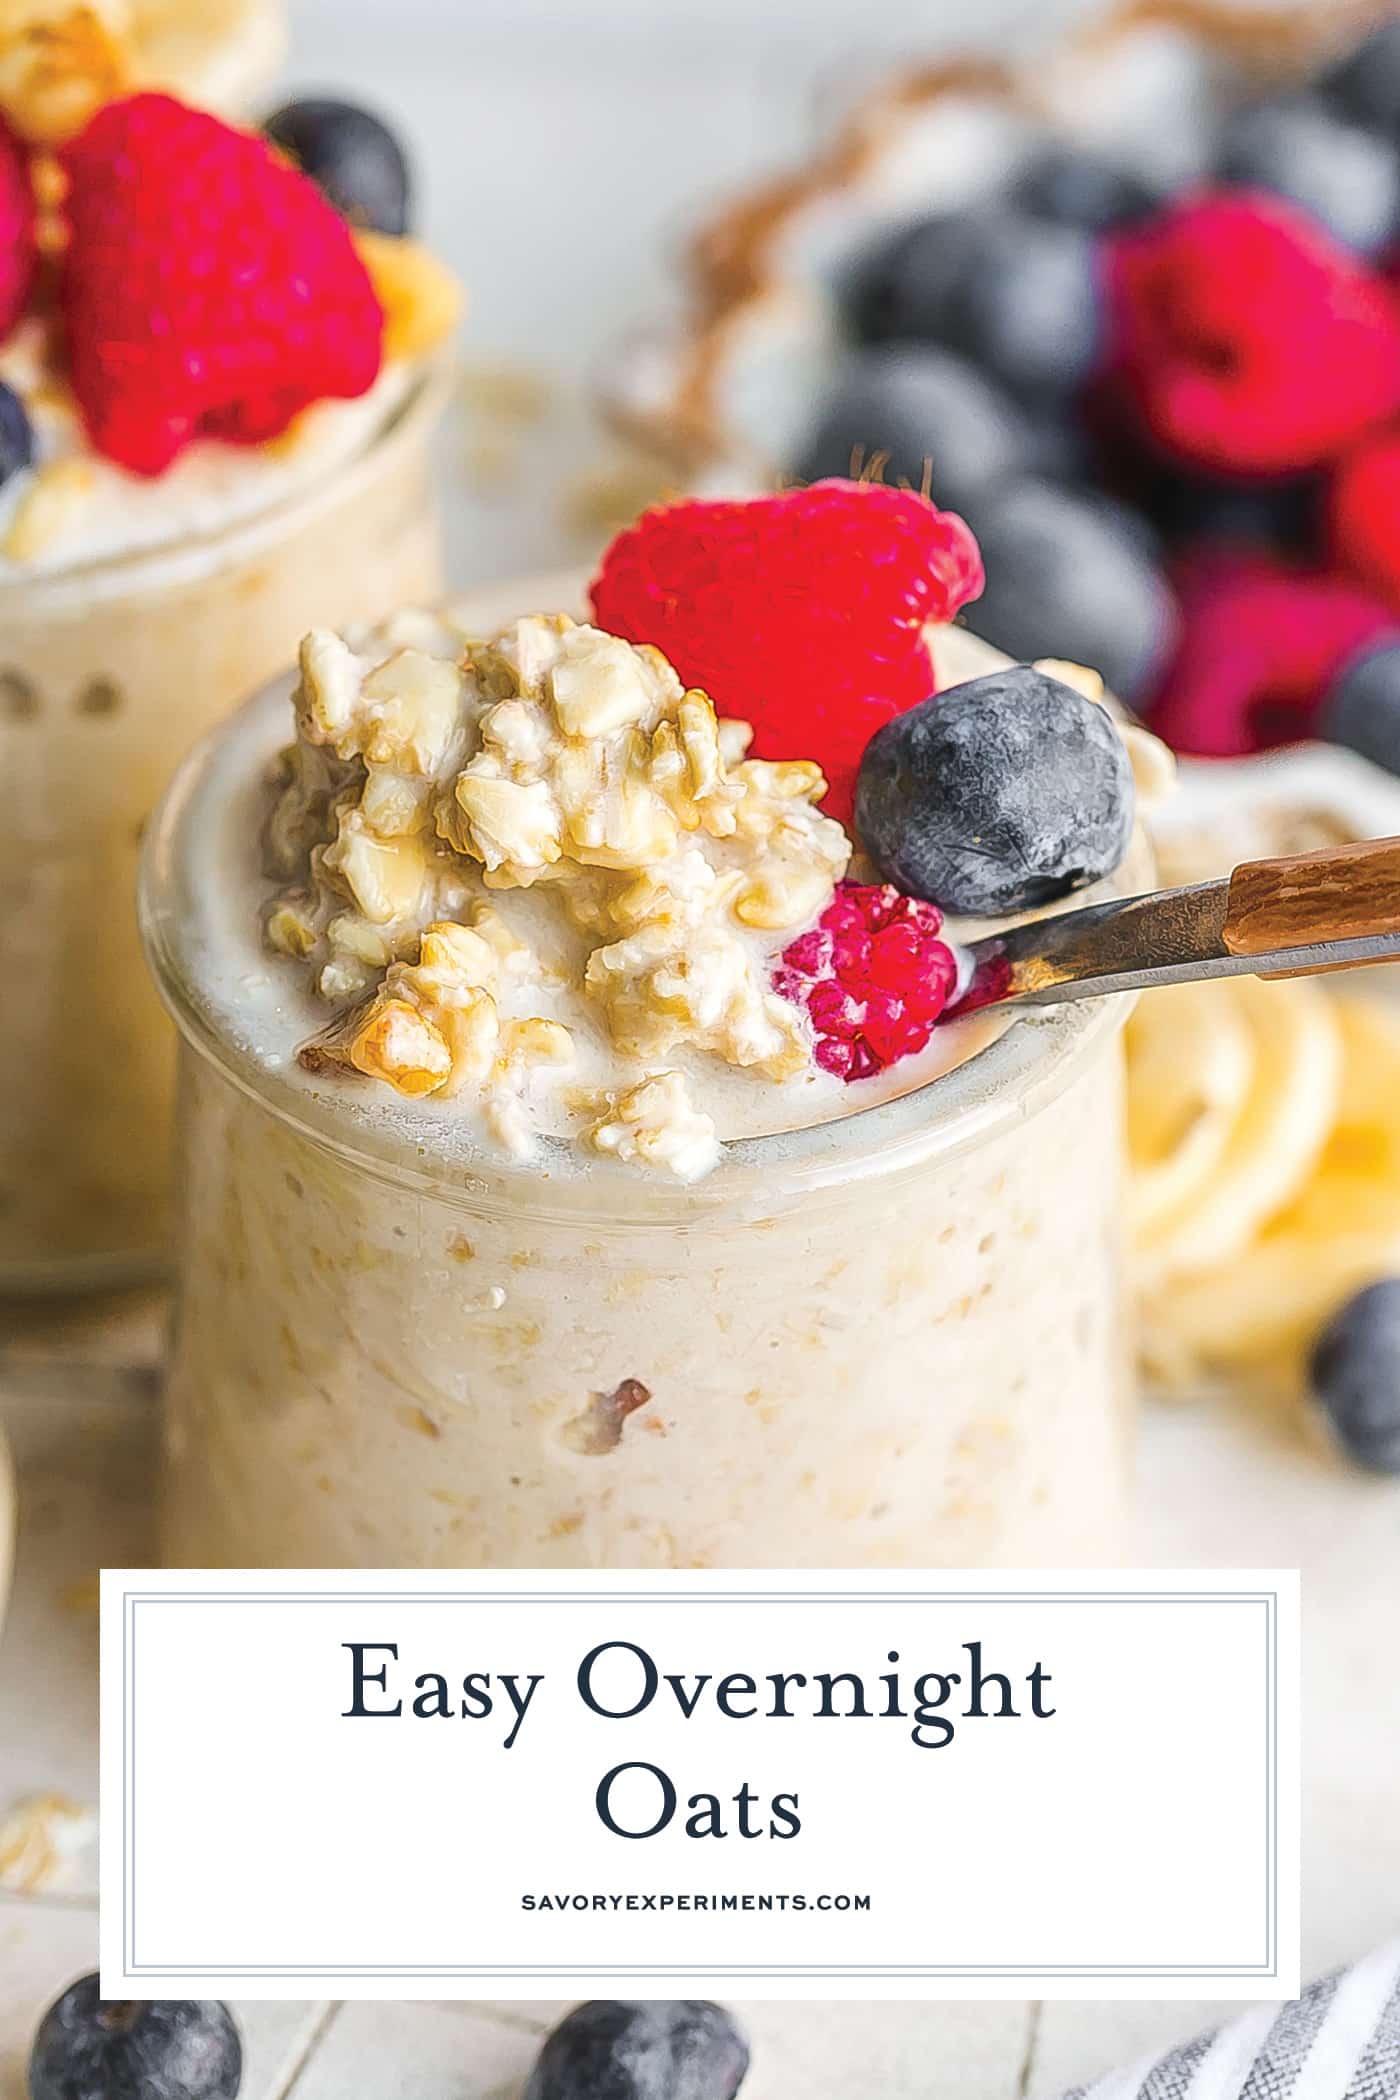 spoon in jar of overnight oats with text overlay for pinterest